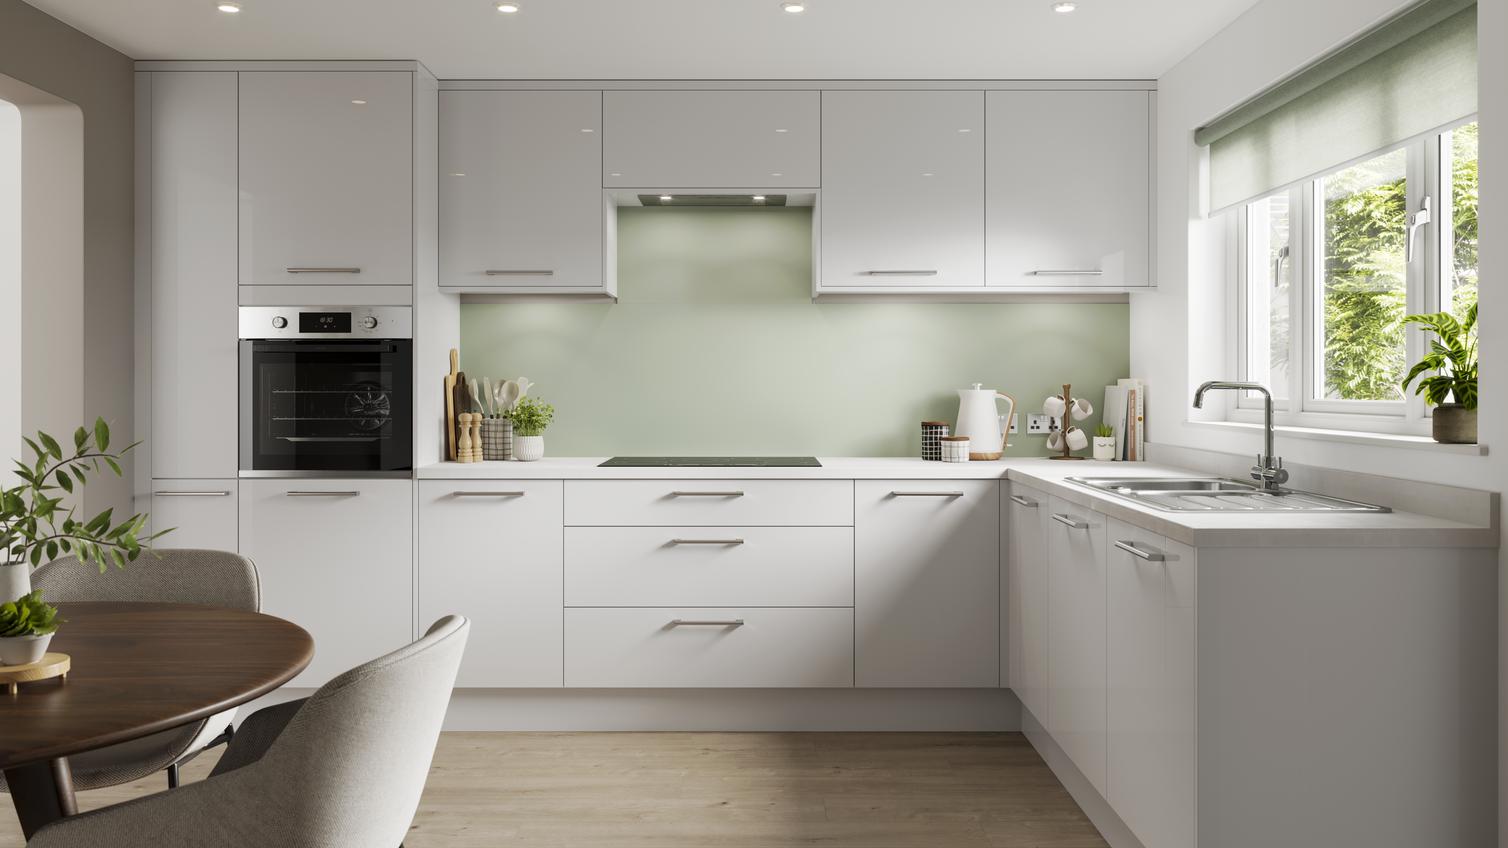 A dove grey kitchen in a gloss finish and in an L-shaped layout. It has integrated appliances and light-oak flooring.